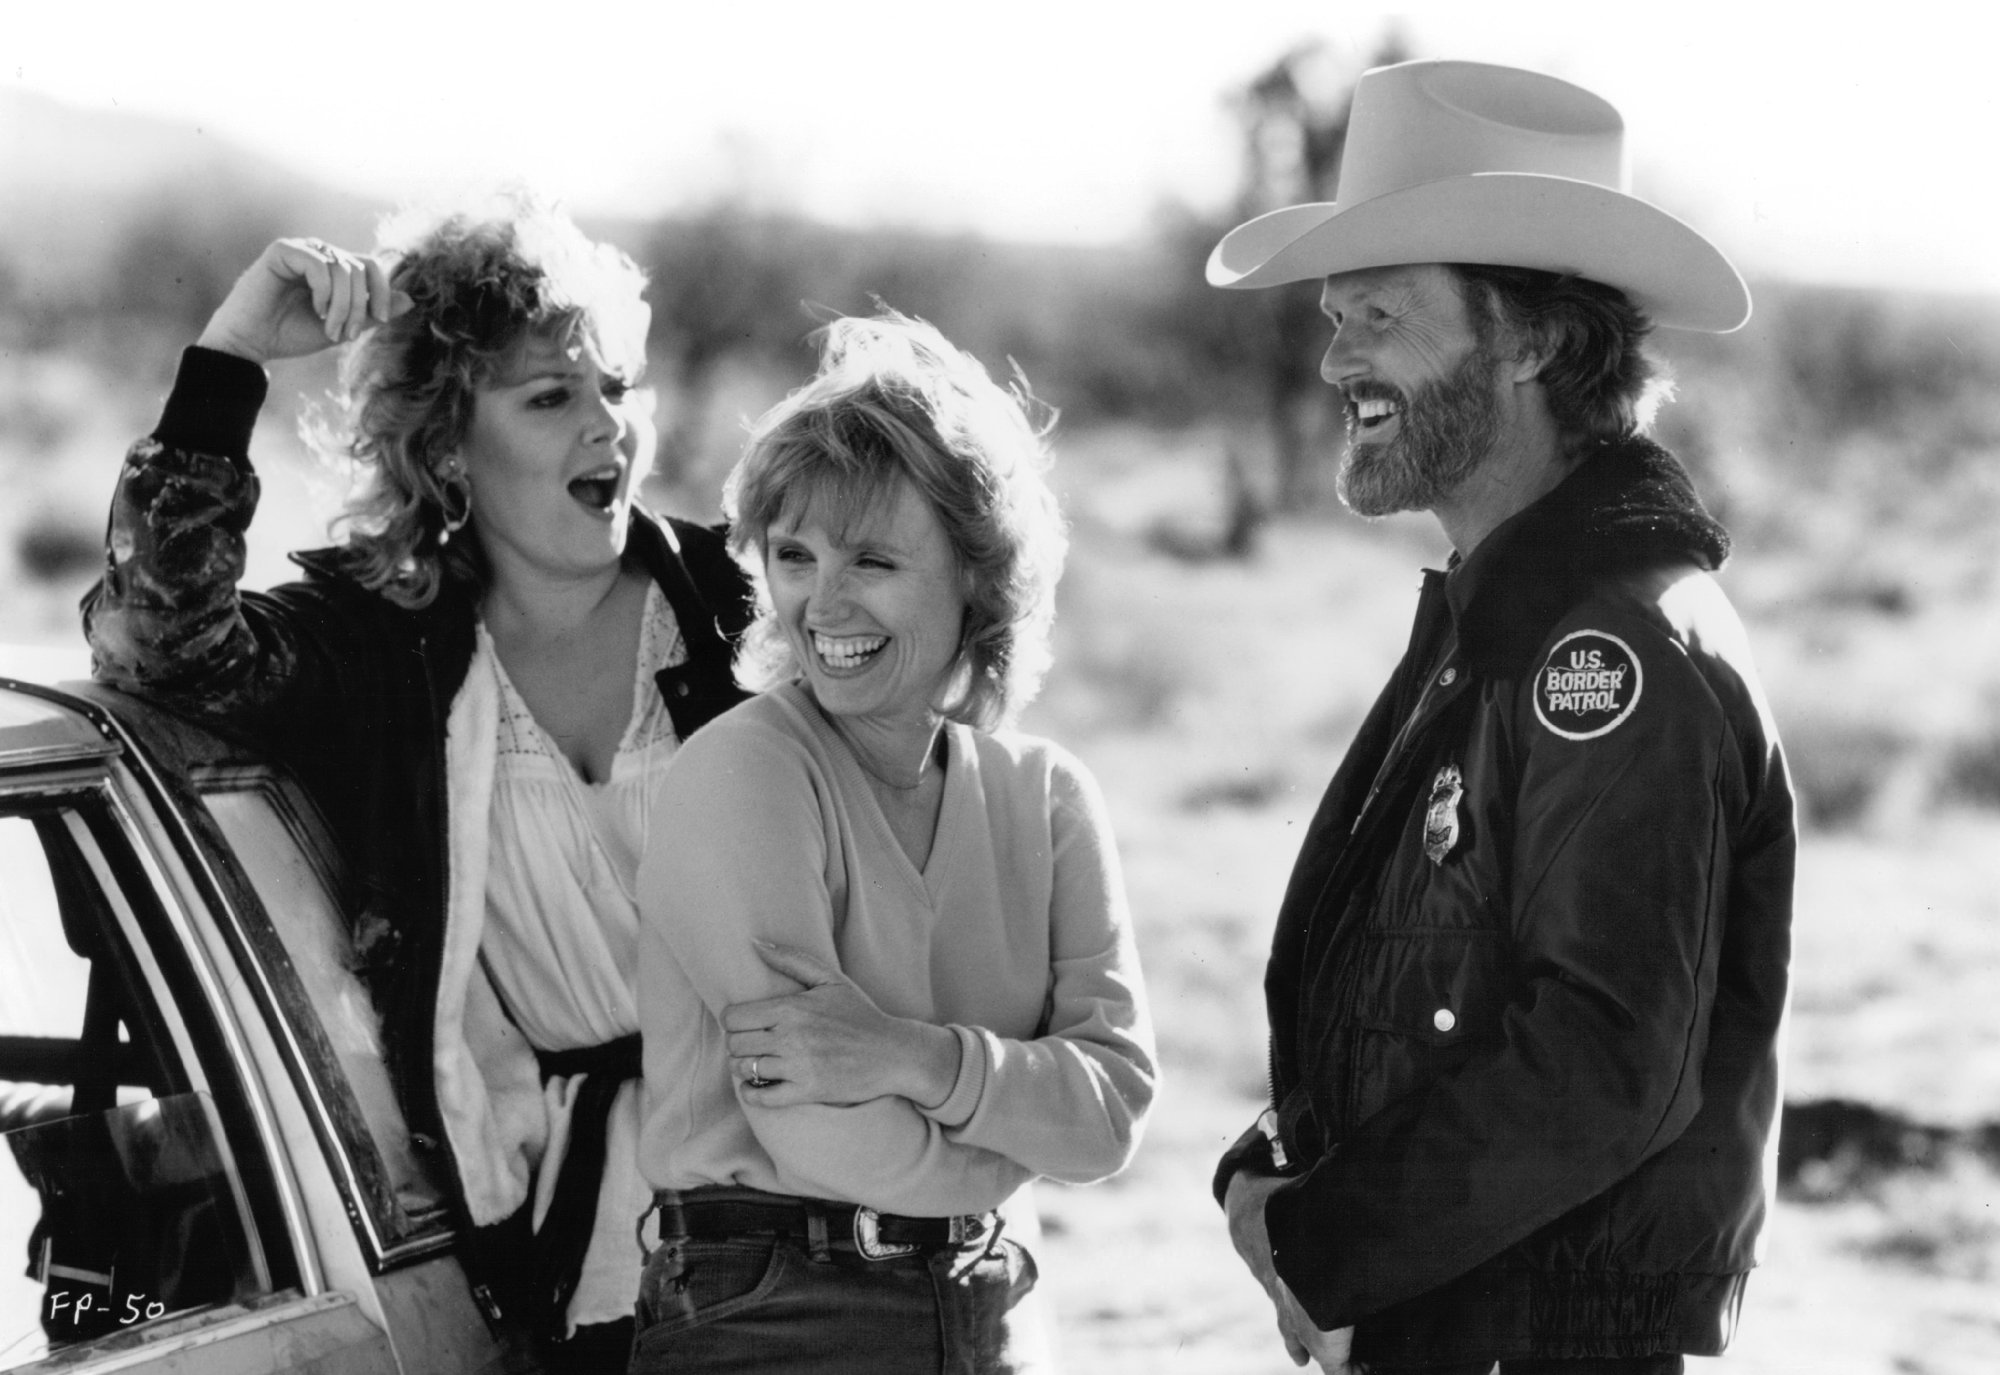 Download movies with Kris Kristofferson, films, filmography and biography at ...2000 x 1375